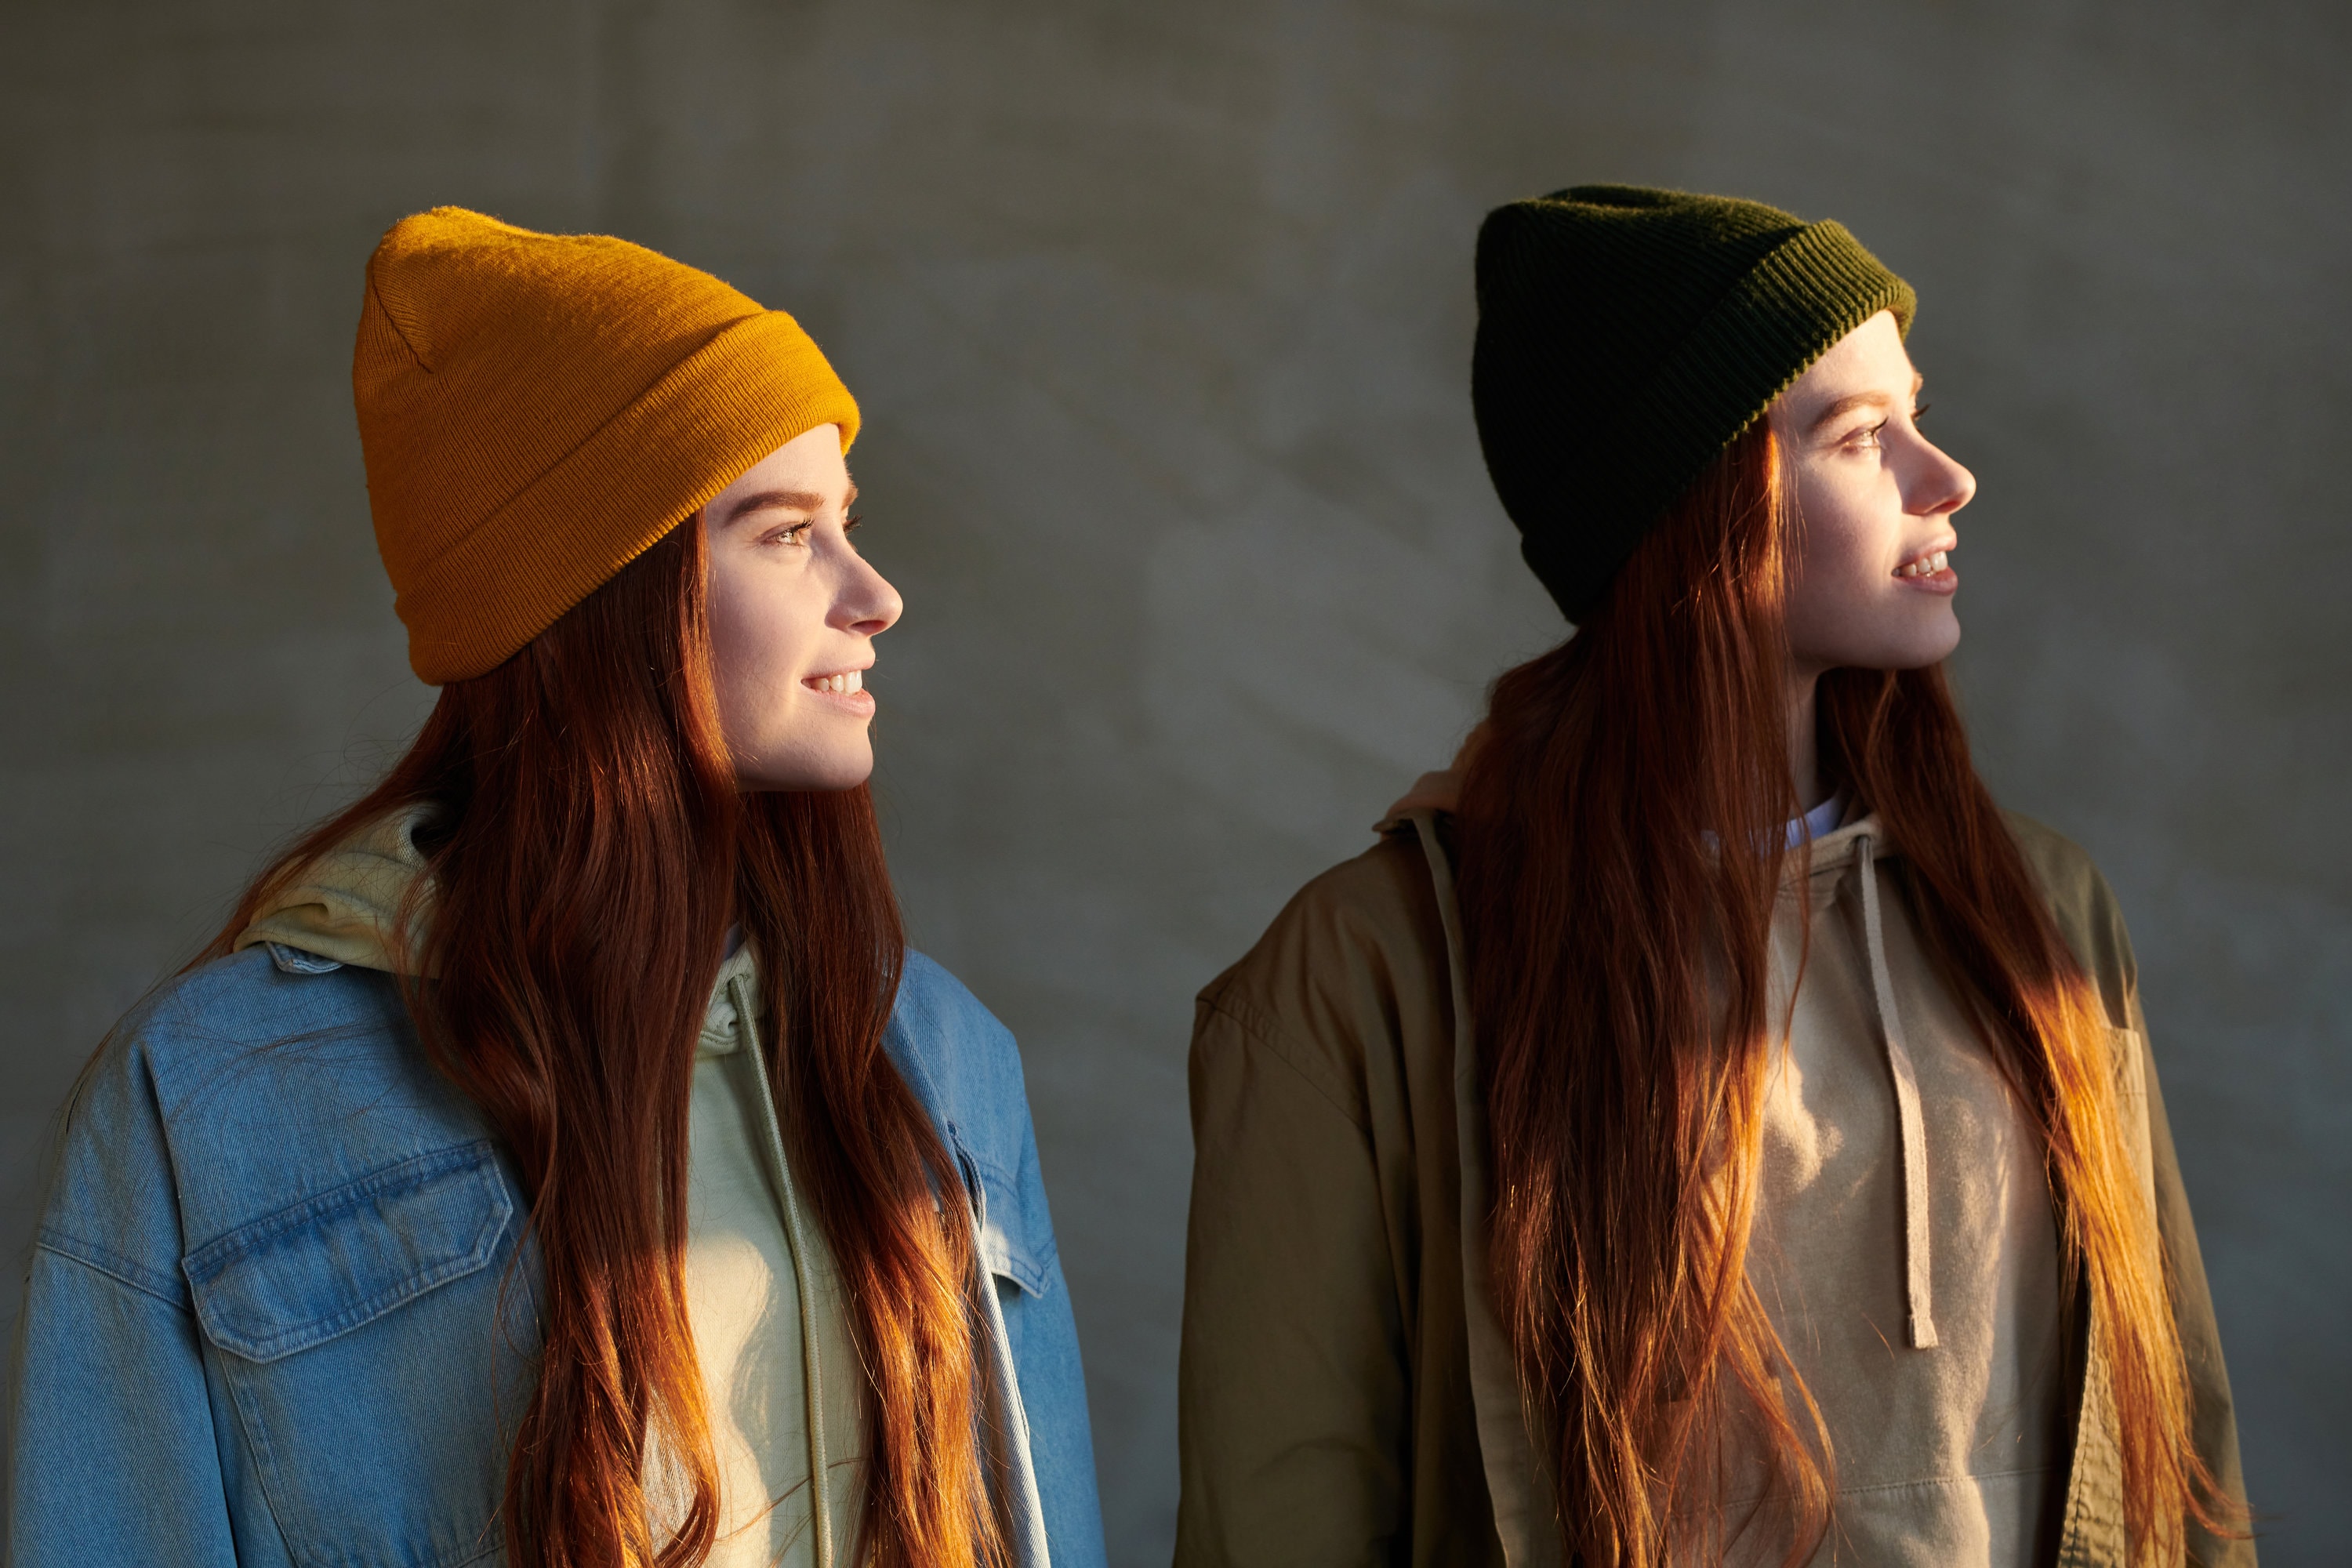 Female twins wearing beanie hats look out into the distance.